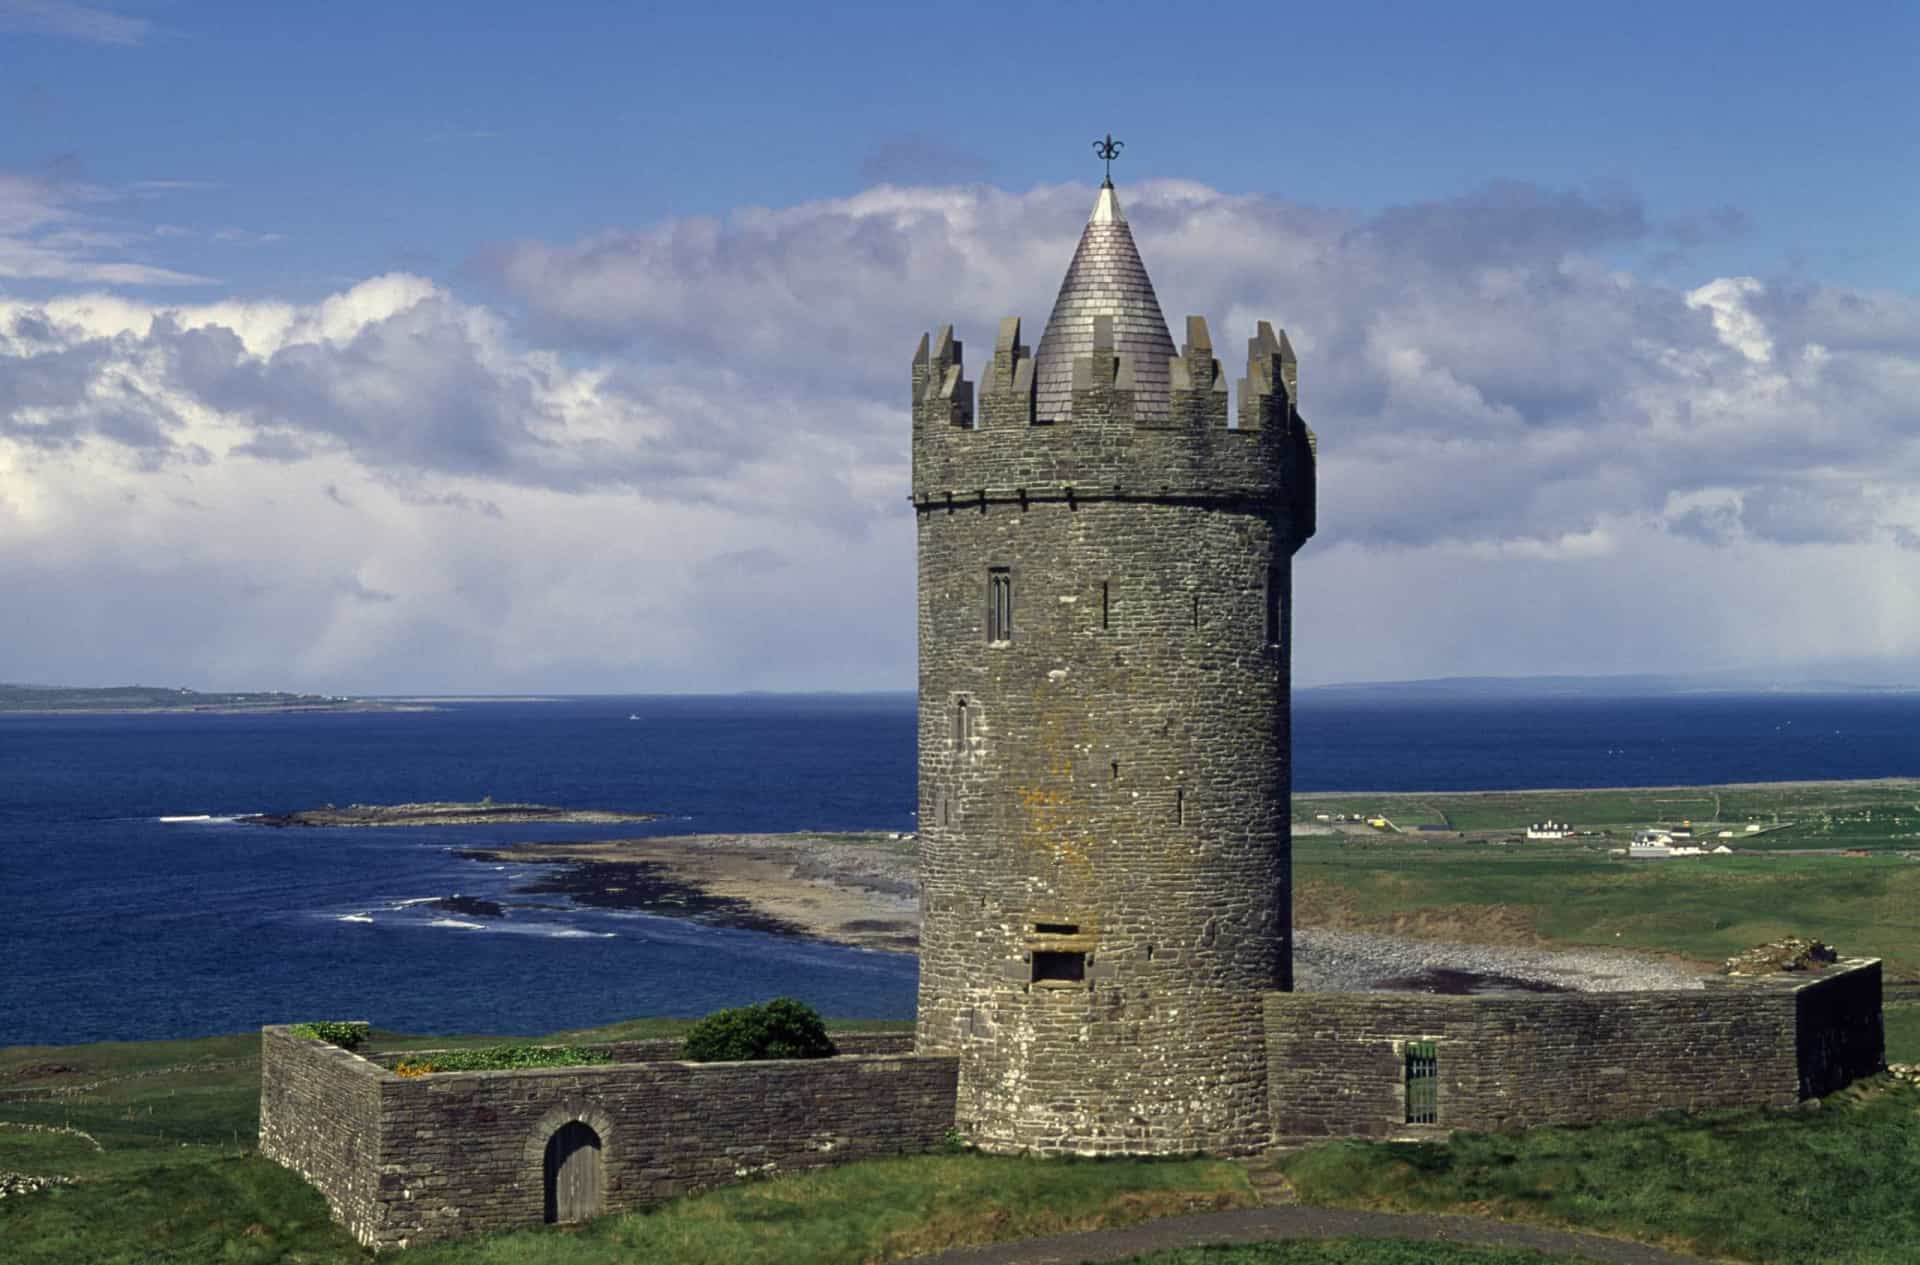 <p>The coastal village of Doolin is marked by numerous archaeological sites, many dating to the Iron Age and earlier. Historical landmarks such as Doonagore Castle, a round 16th-century tower house overlooking Doolin Point, lends additional character to this popular tourist destination.</p>